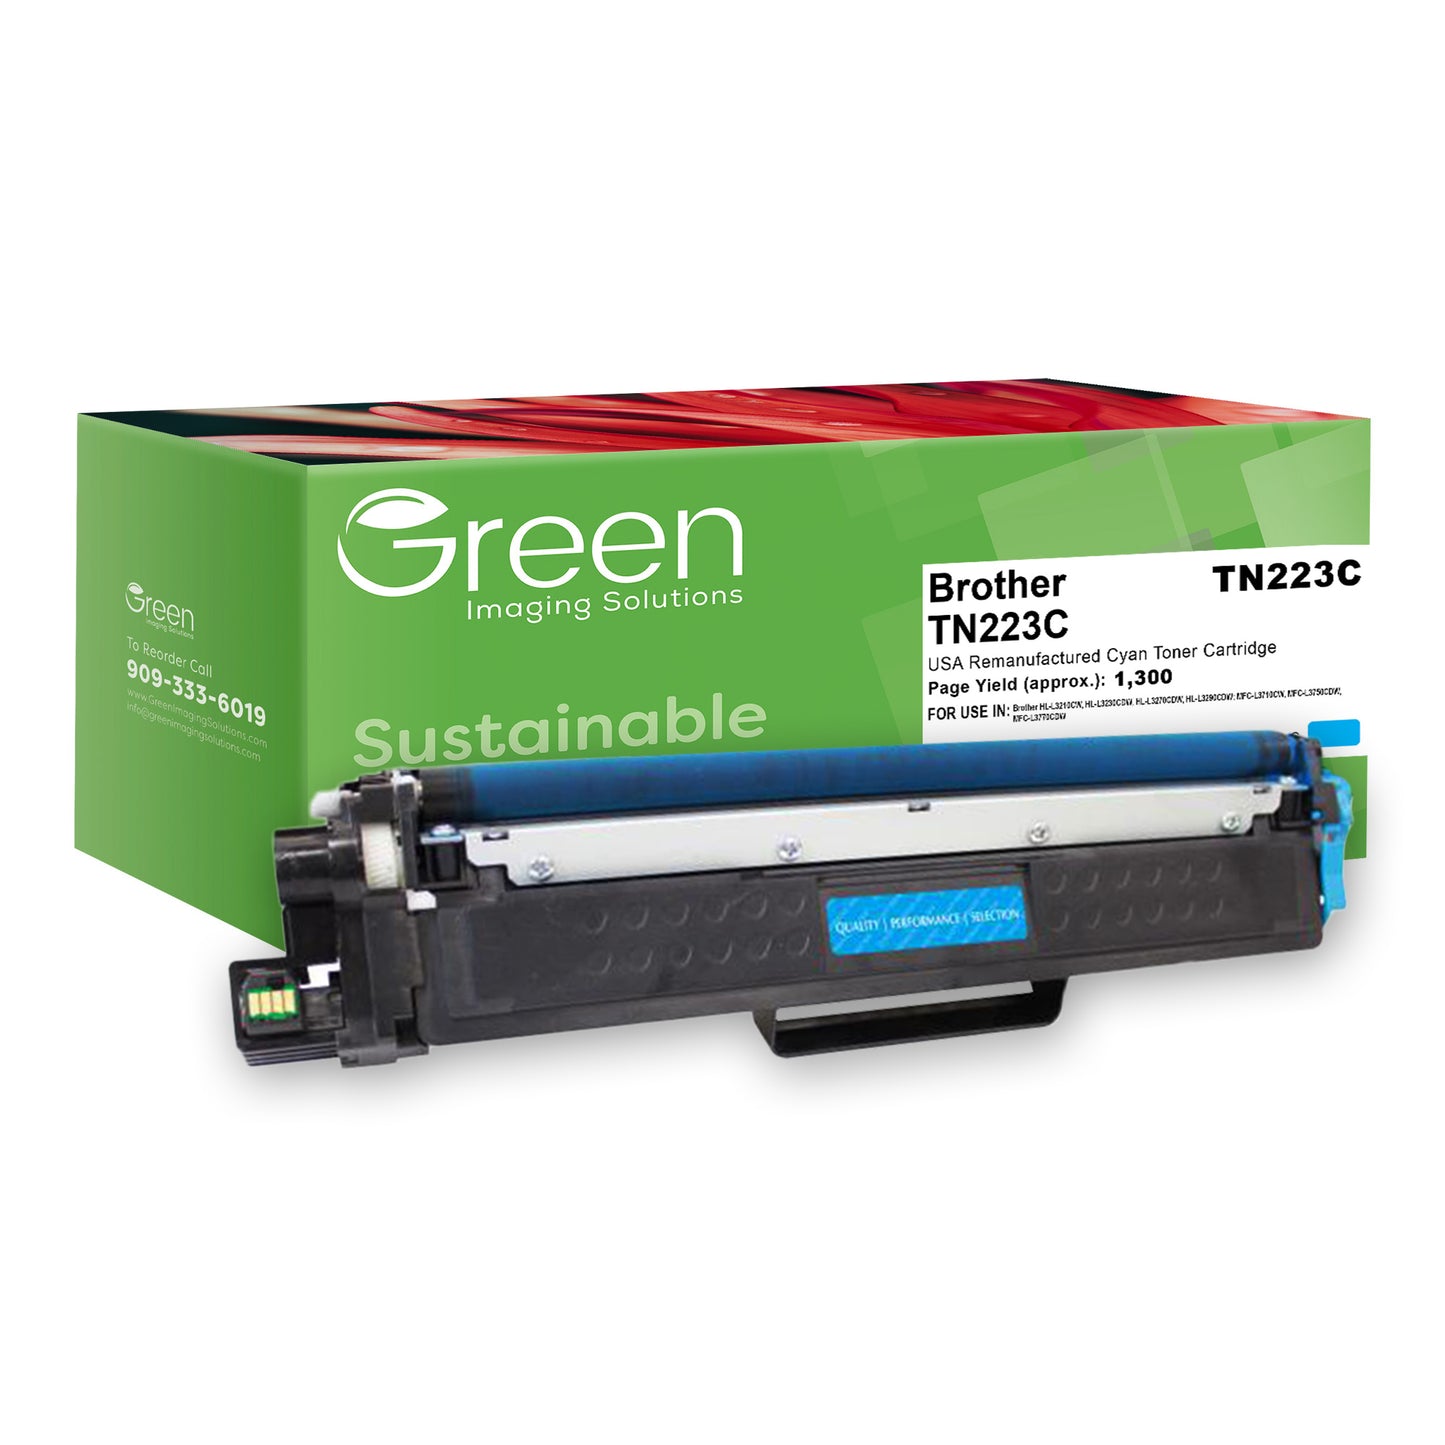 Green Imaging Solutions USA Remanufactured Cyan Toner Cartridge for Brother TN223